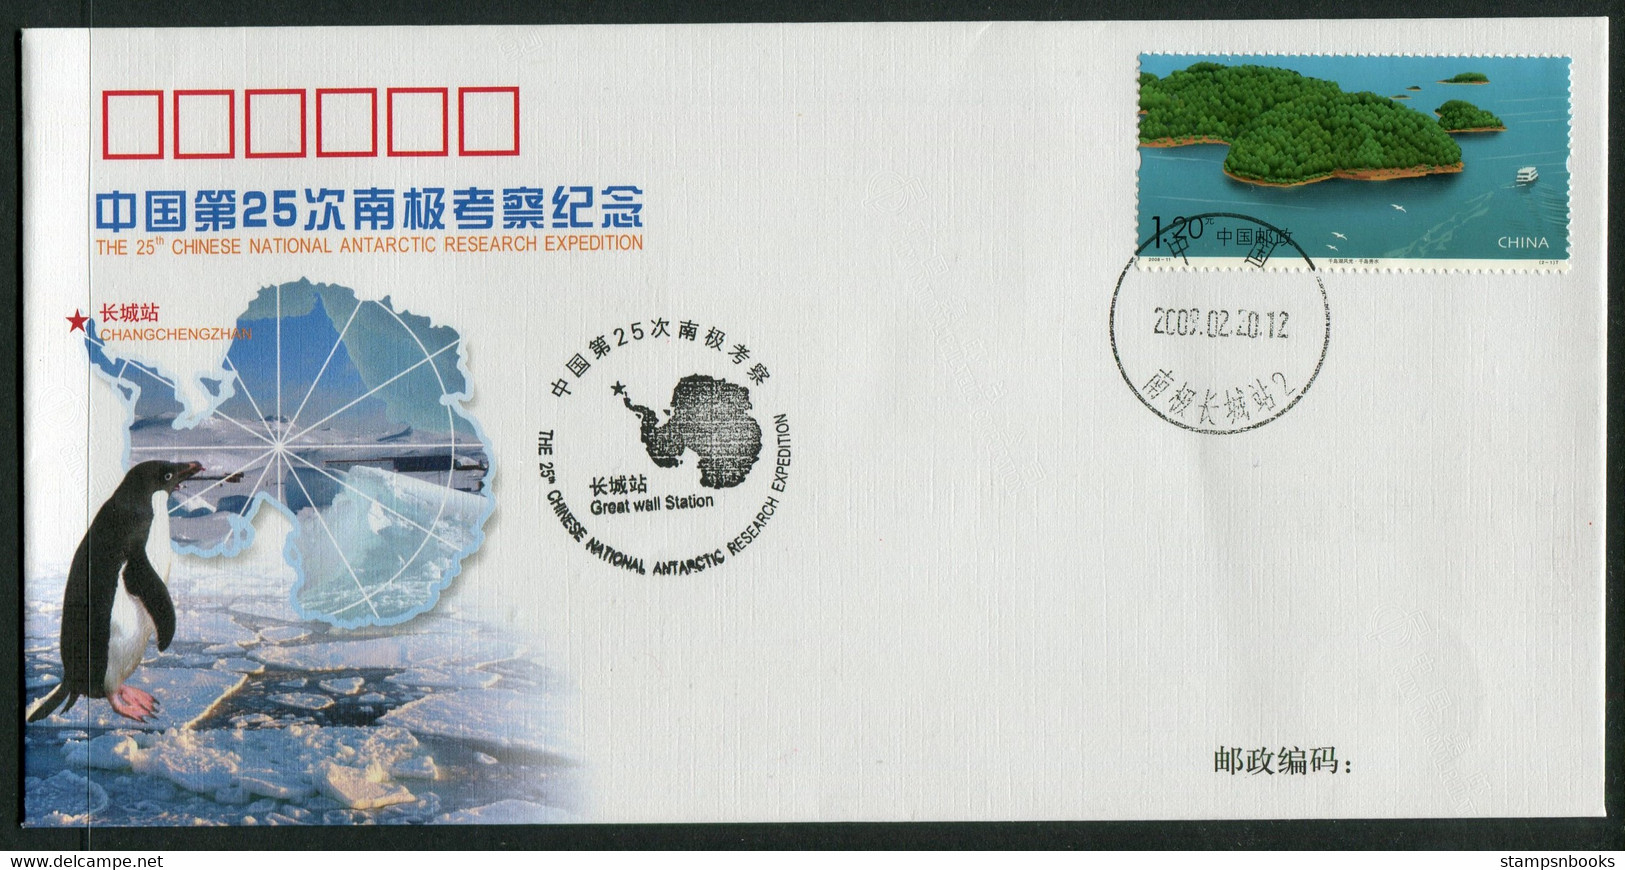 2008/9 China 25th Chinese National Antarctic Research Expedition X 3 Polar Antarctica Penquin Ship Covers - Research Programs